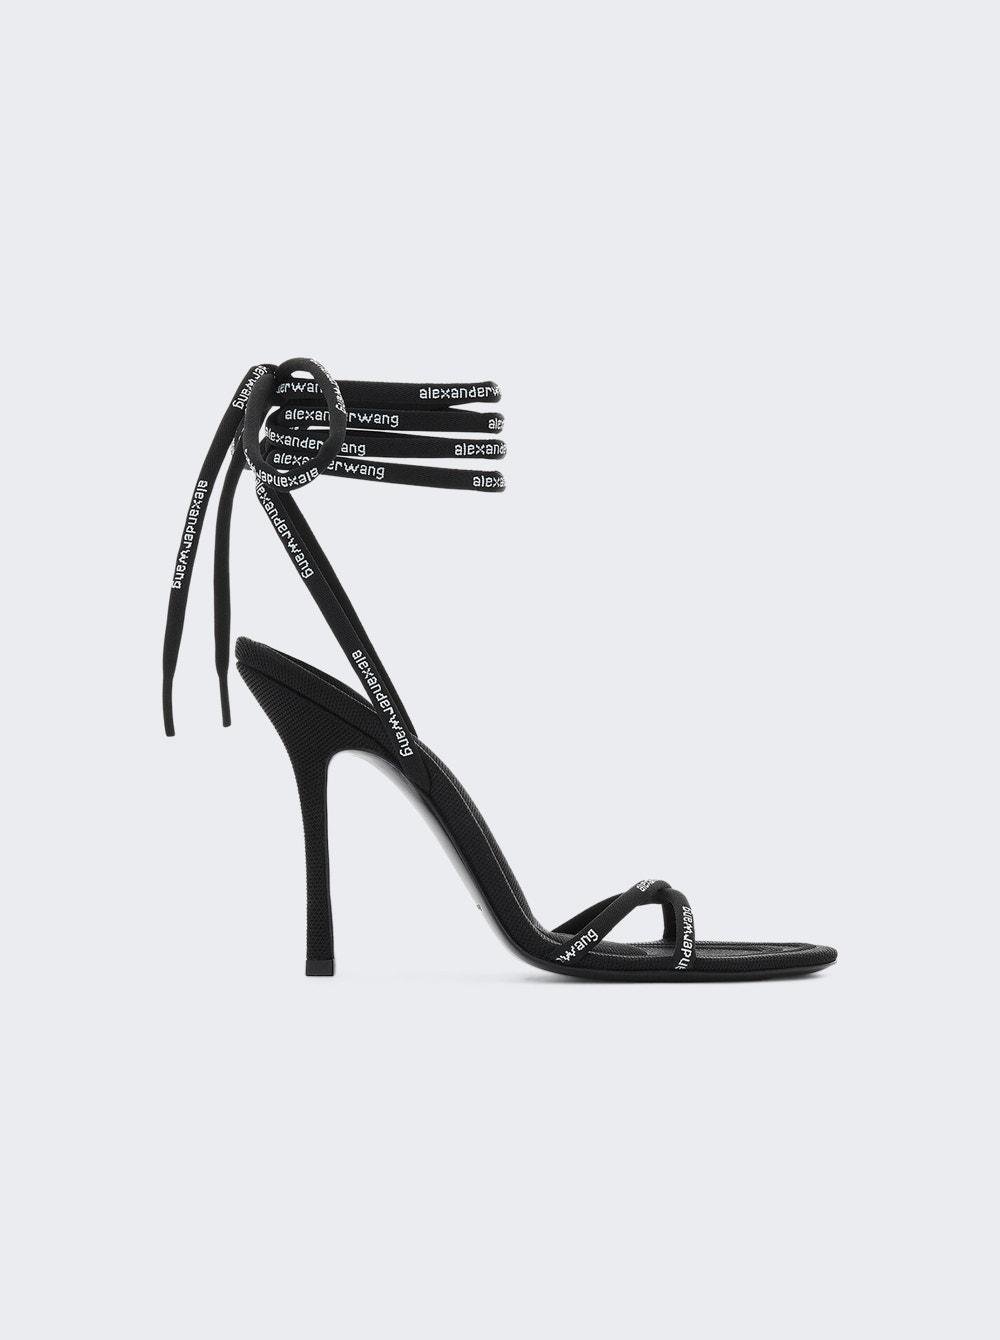 Helix Strappy Sandal Black  | The Webster by ALEXANDER WANG